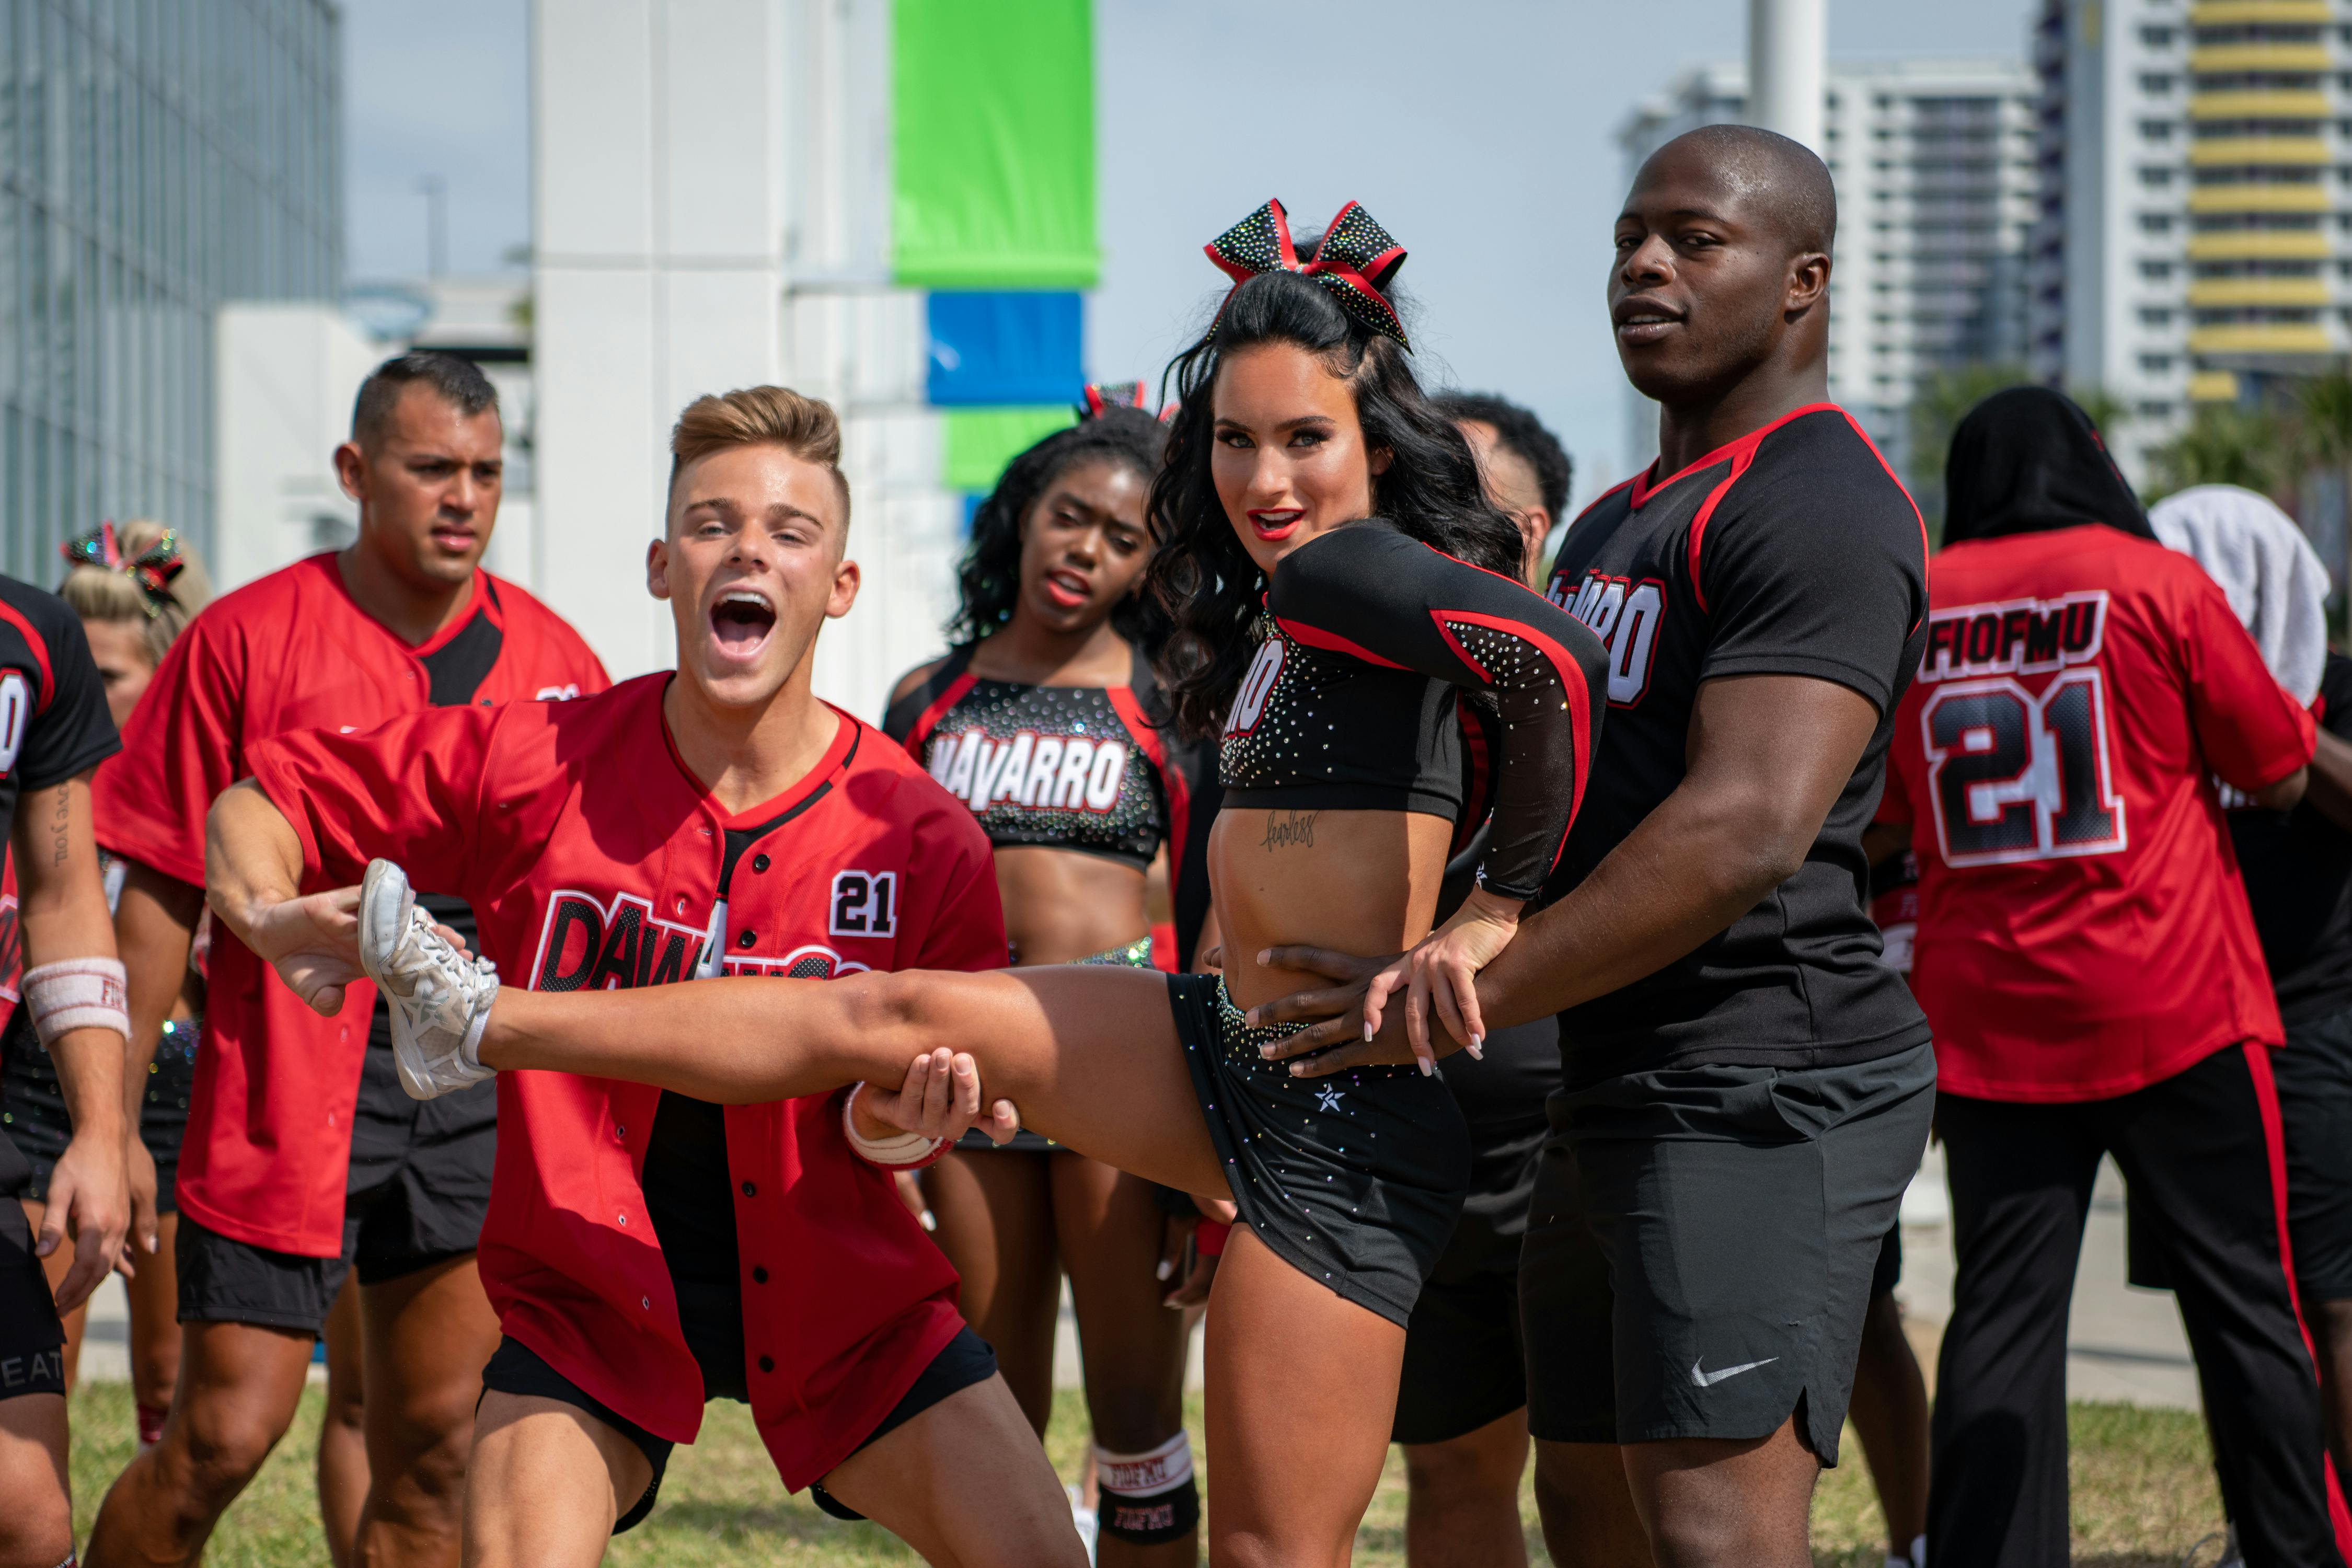 The Cheer cast prepare for a lift. They wear black and red uniforms.